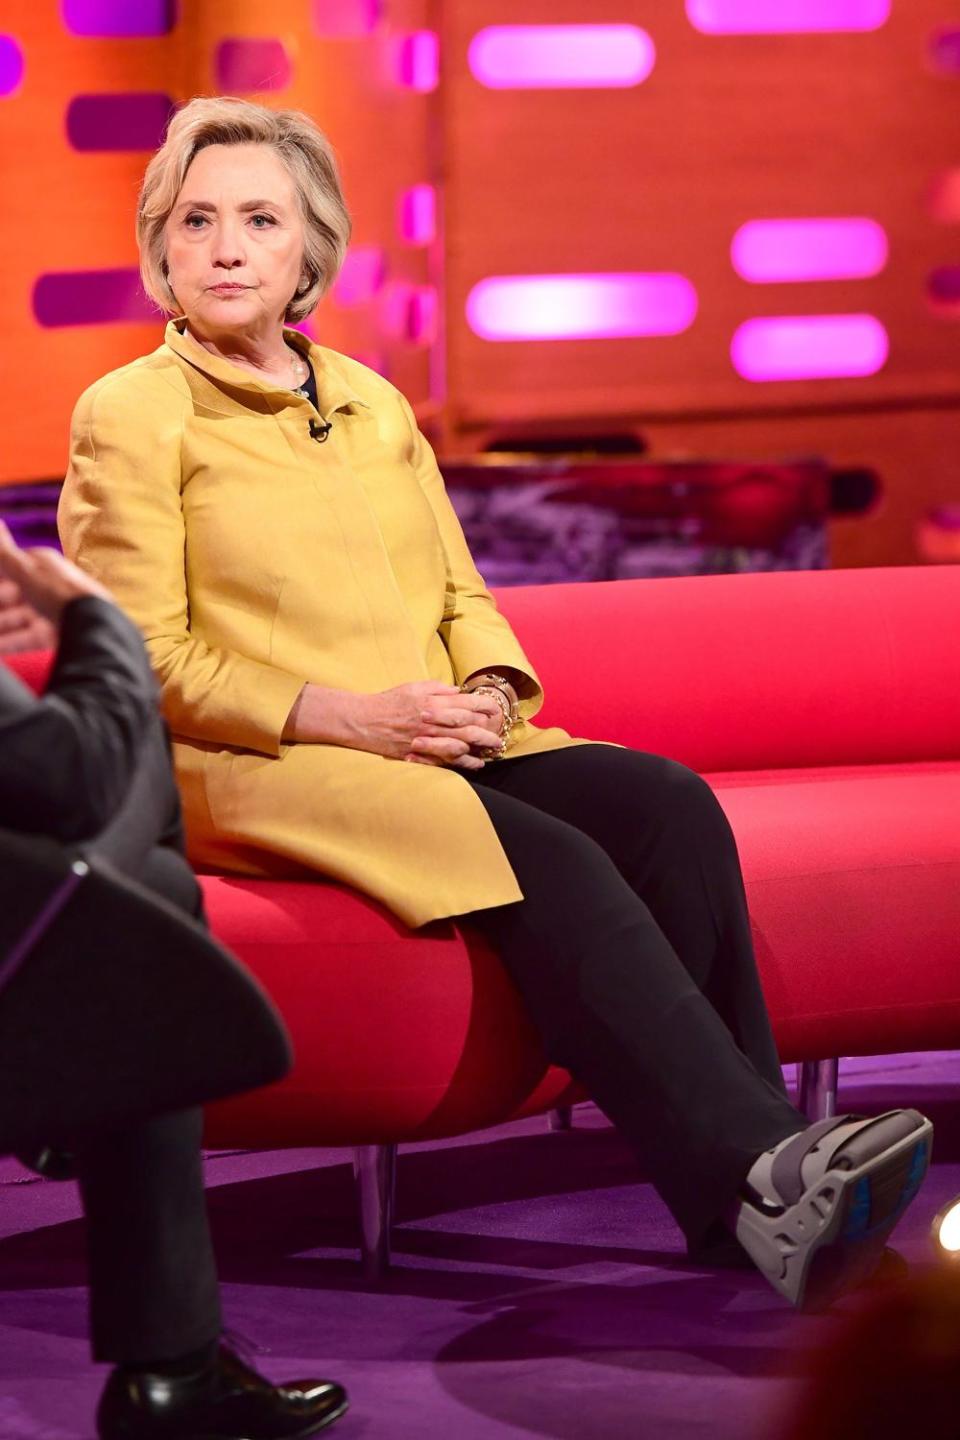 Injured: Hillary Clinton during filming of the Graham Norton Show (PA)